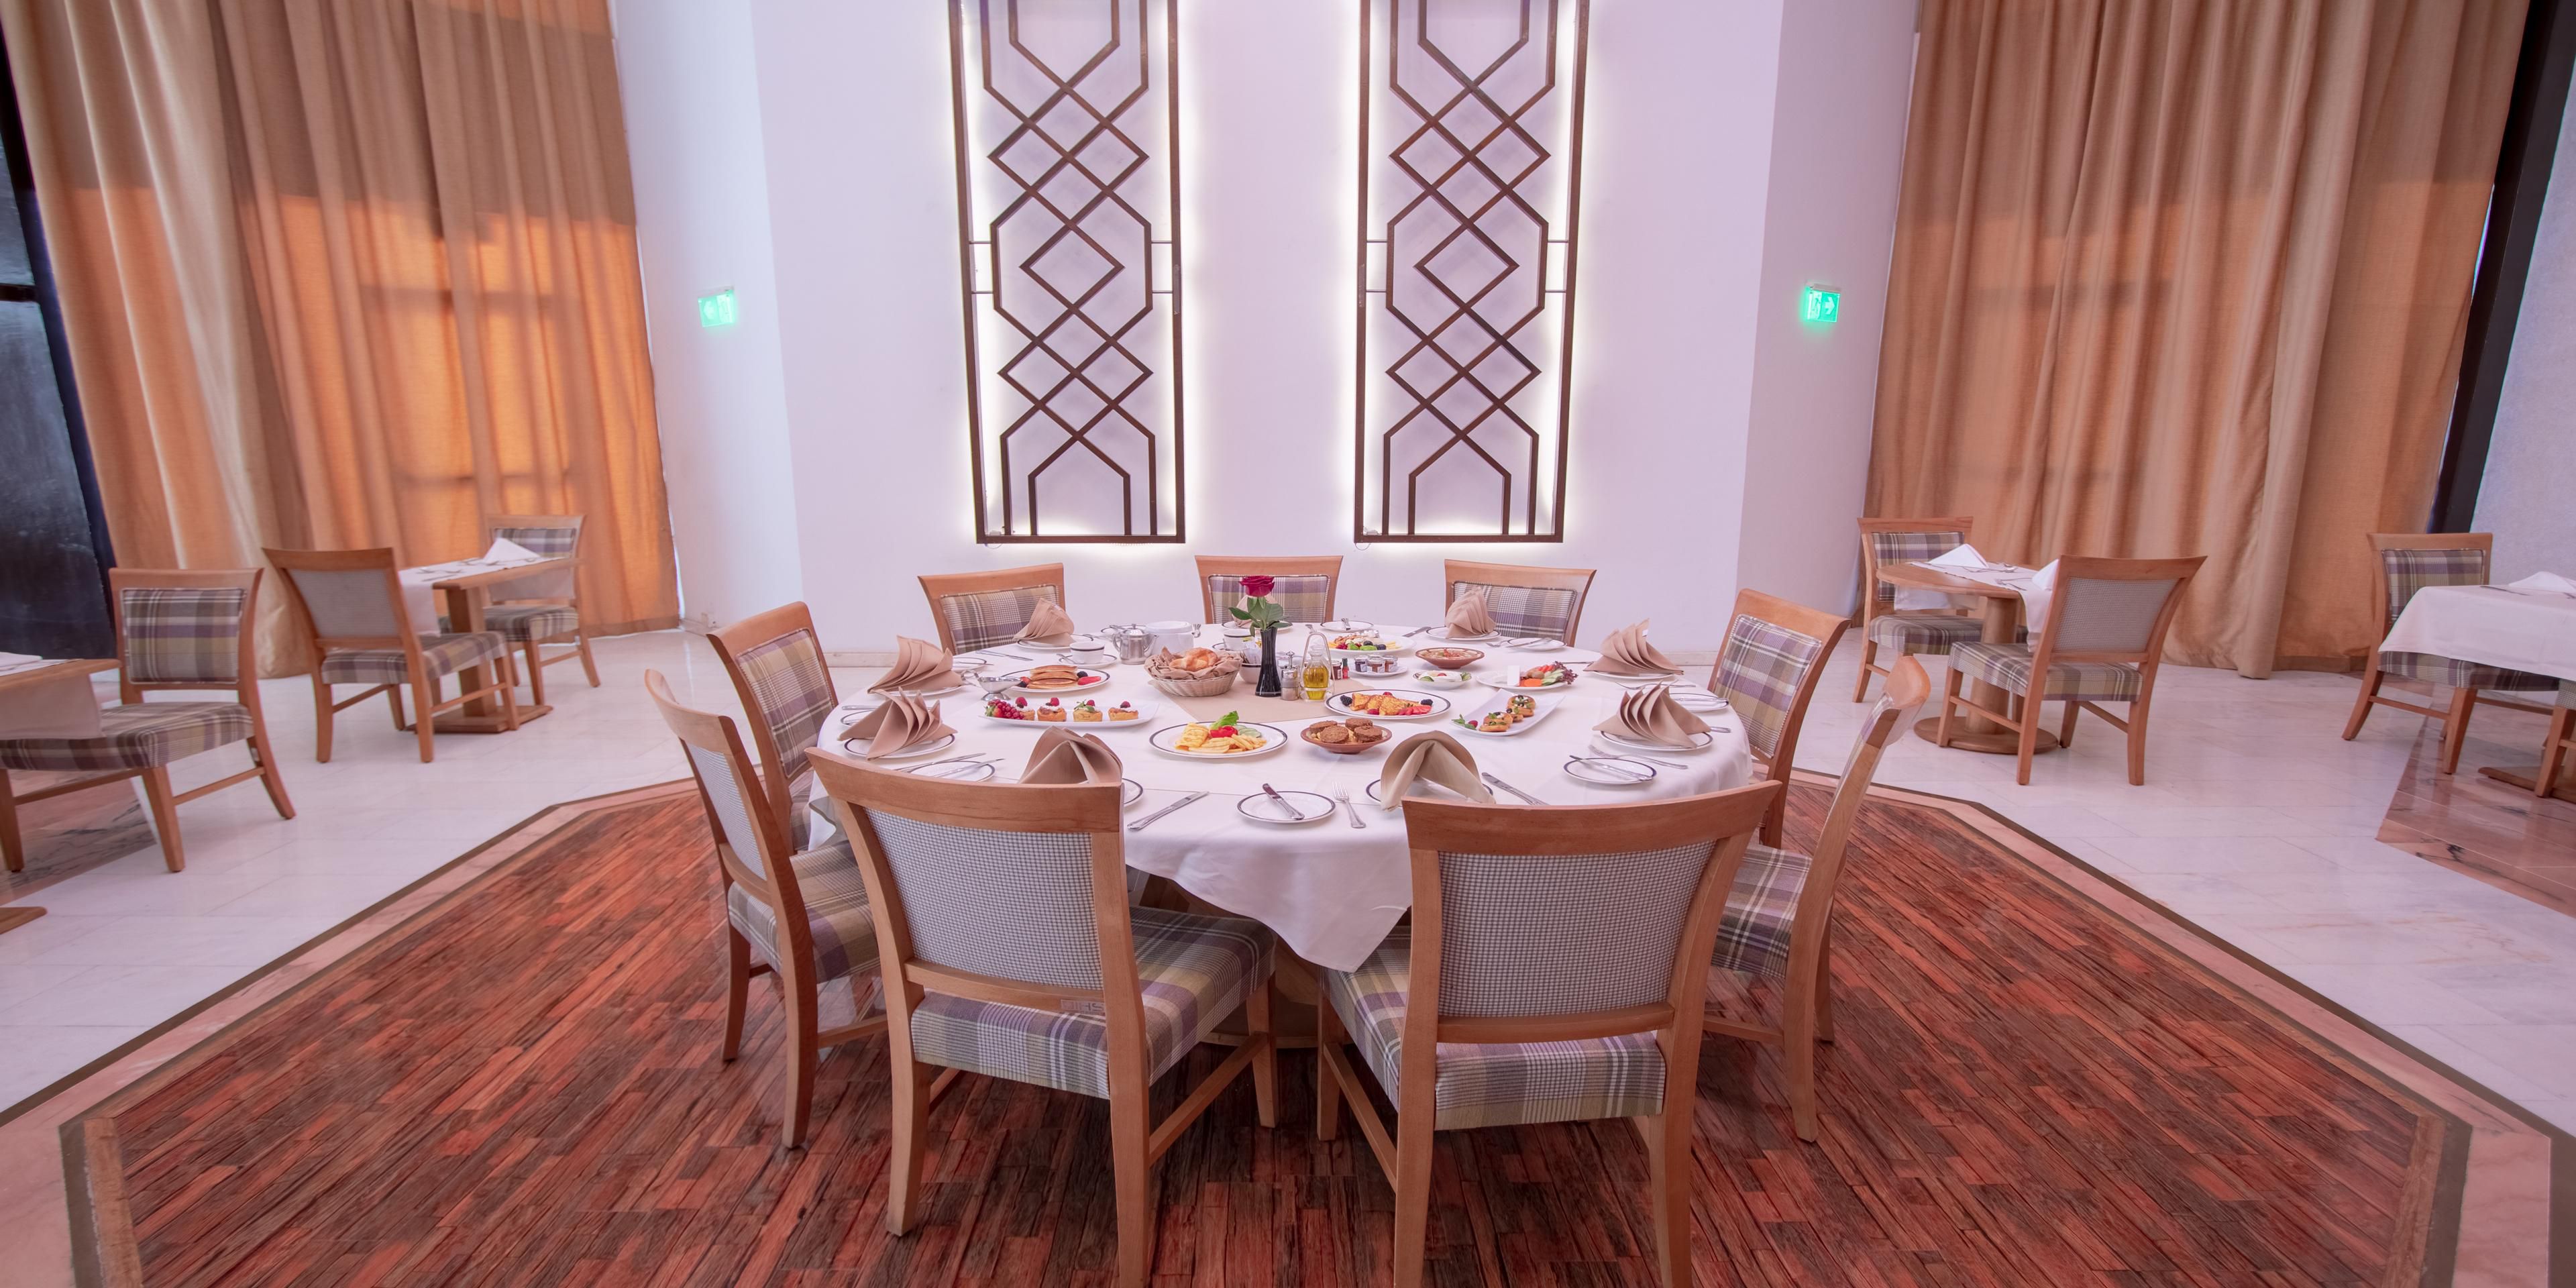 Operating hours for Hawazen Restaurant are 6:30 AM to 23:30 PM.   Breakfast is served from 6:30 am to 10:30 am, Lunch is served from 12:30 pm to 3:30 pm, and Dinner is served from 7:30 pm to 11:30 pm. Room service is available around-the-clock.